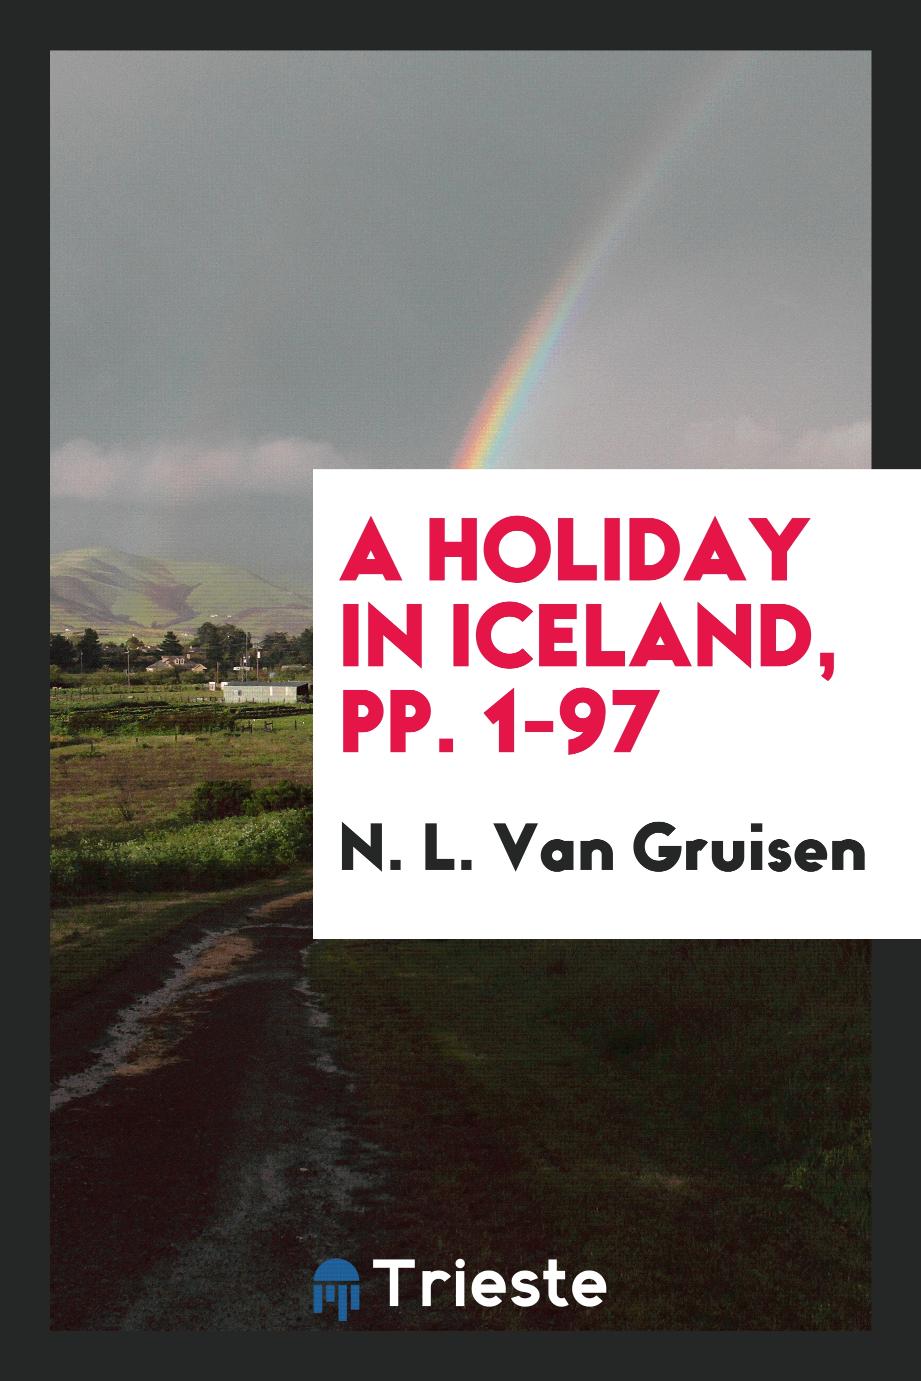 A Holiday in Iceland, pp. 1-97